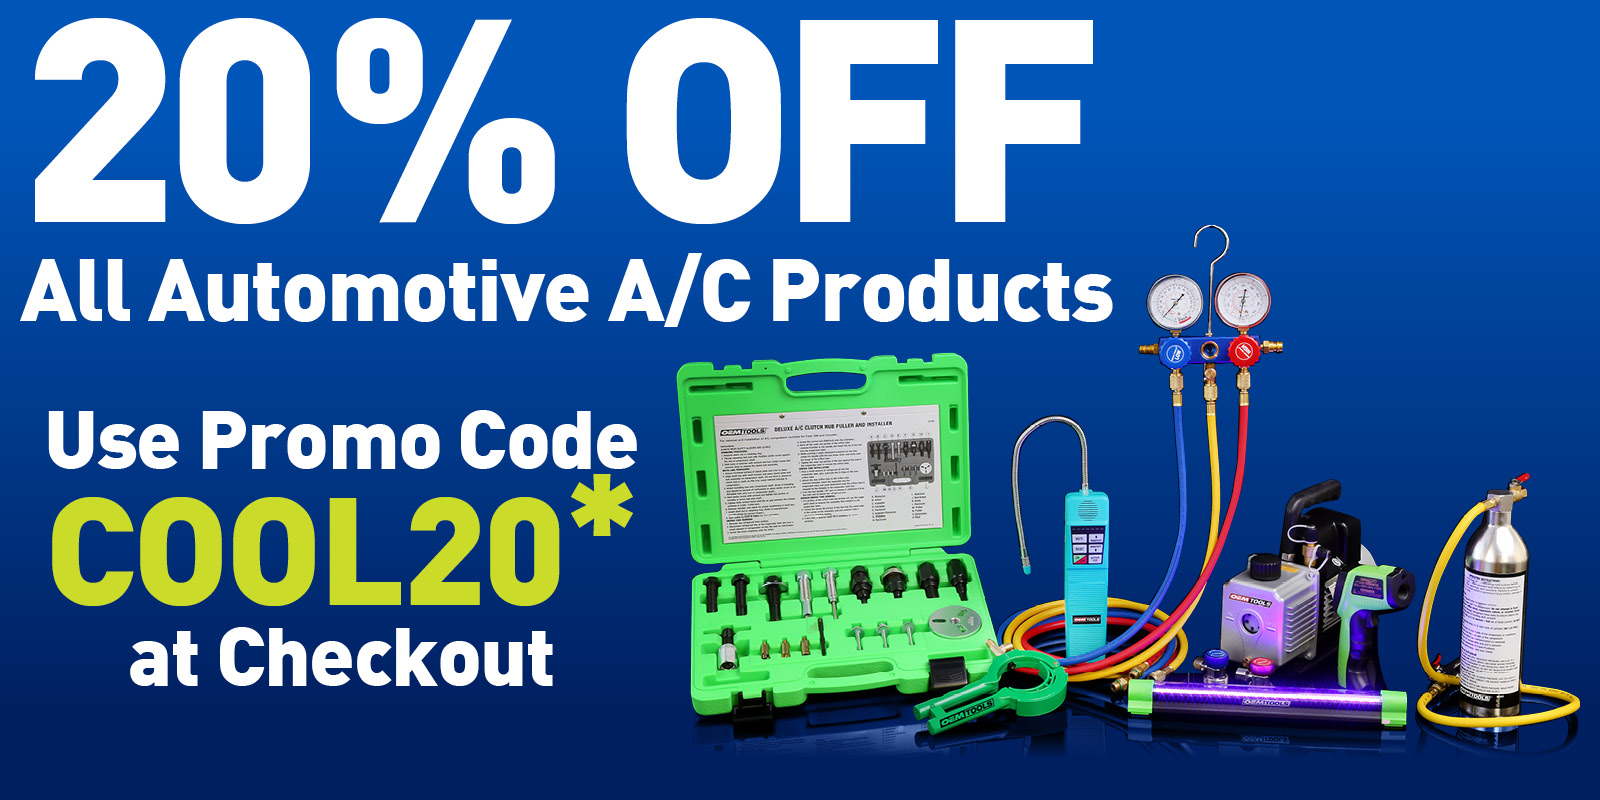 20% OFF ALL Automotive AC Products